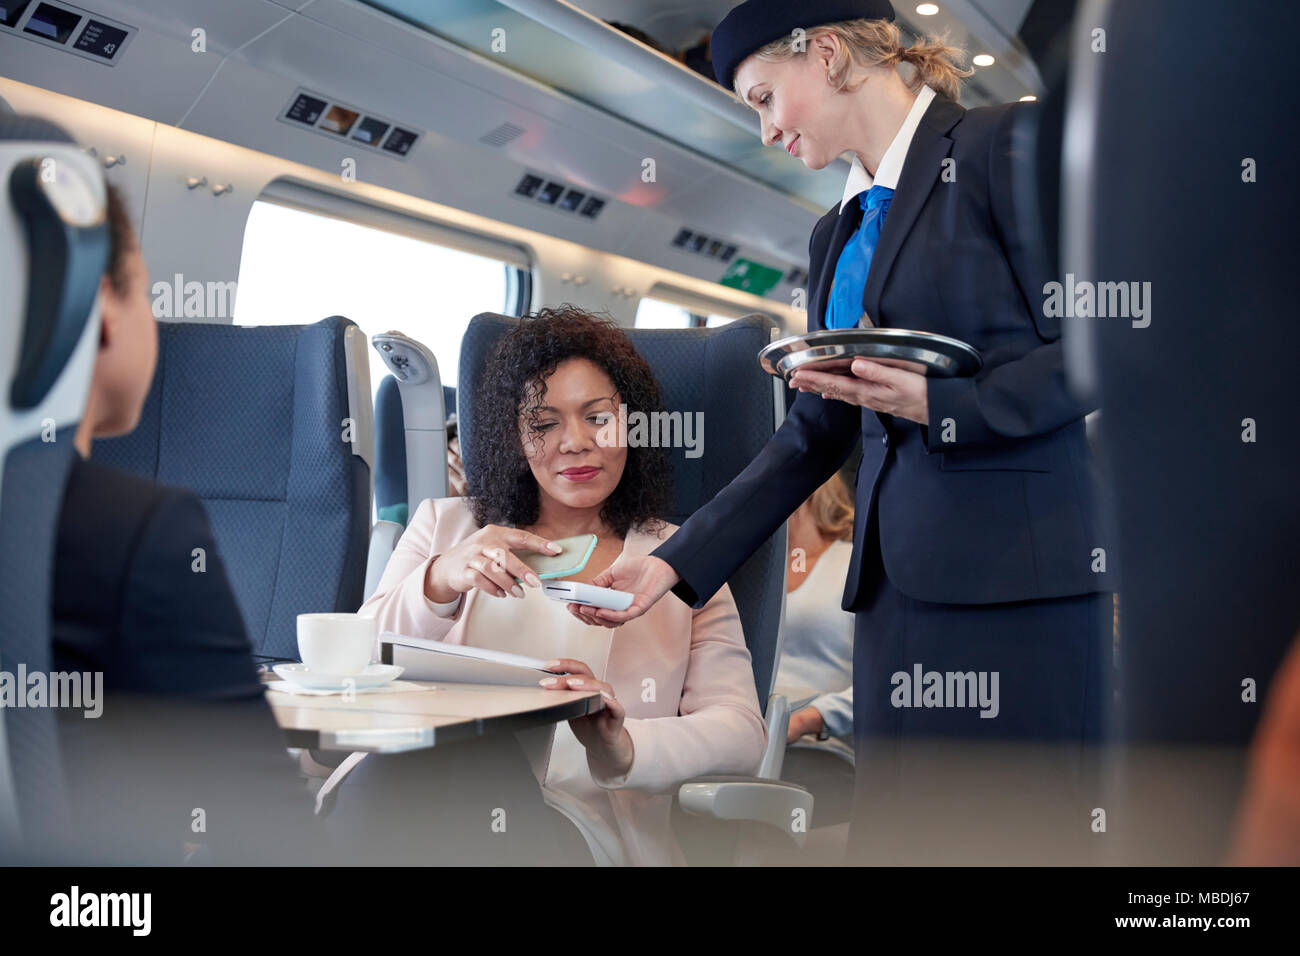 Businesswoman with smart phone using contactless payment, paying attendant on passenger train Stock Photo